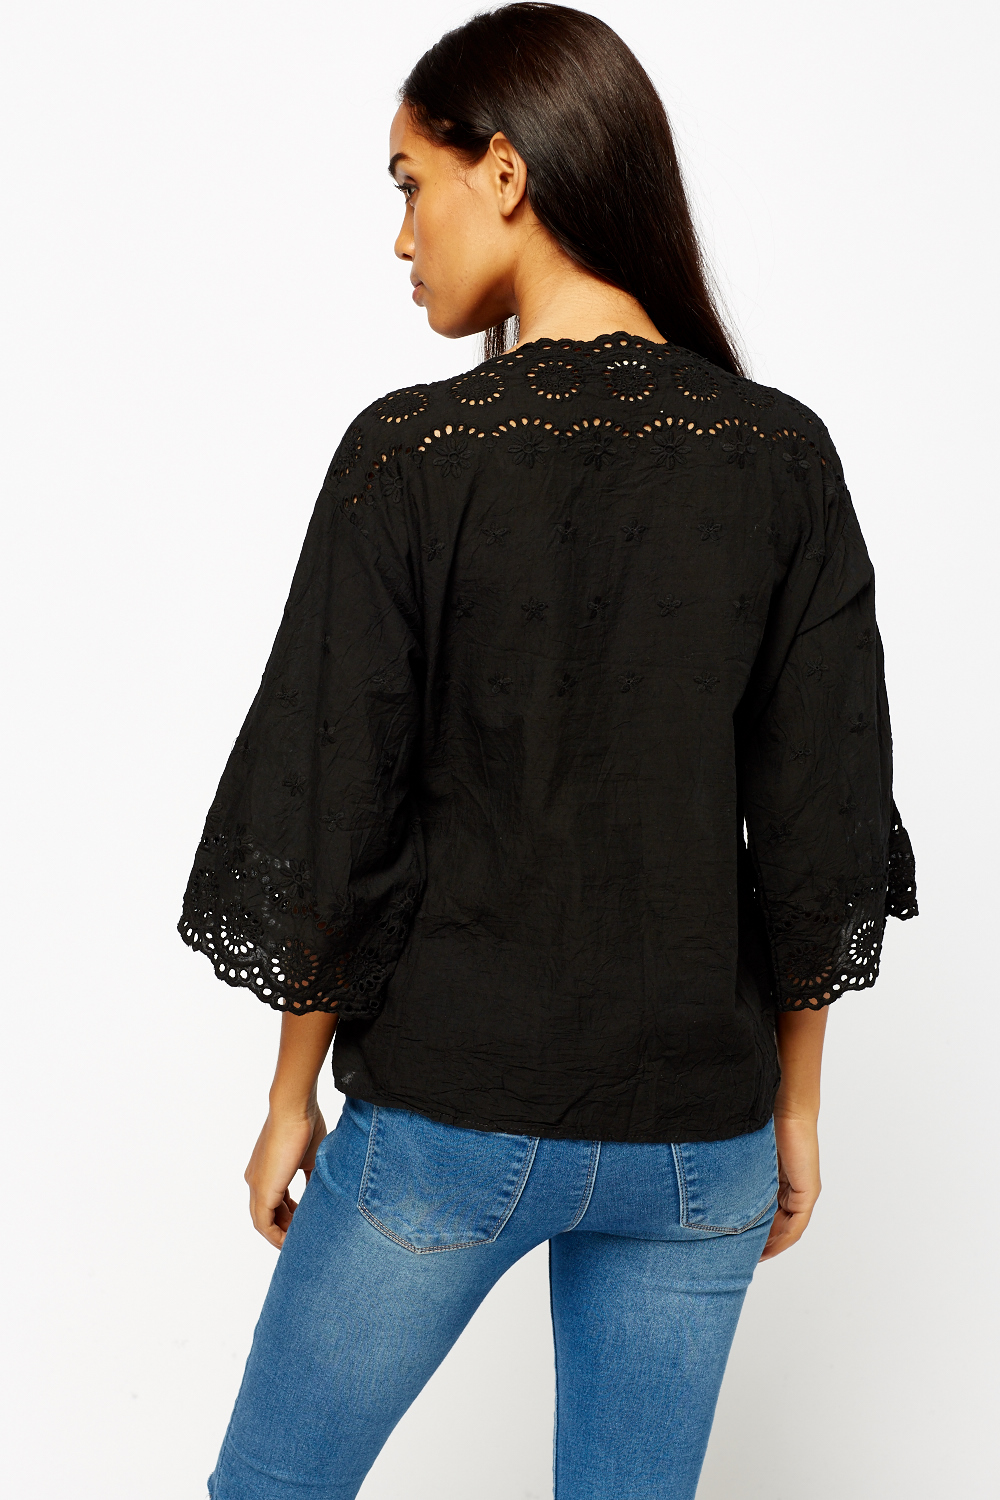 Embroidered Black Top - Just $7